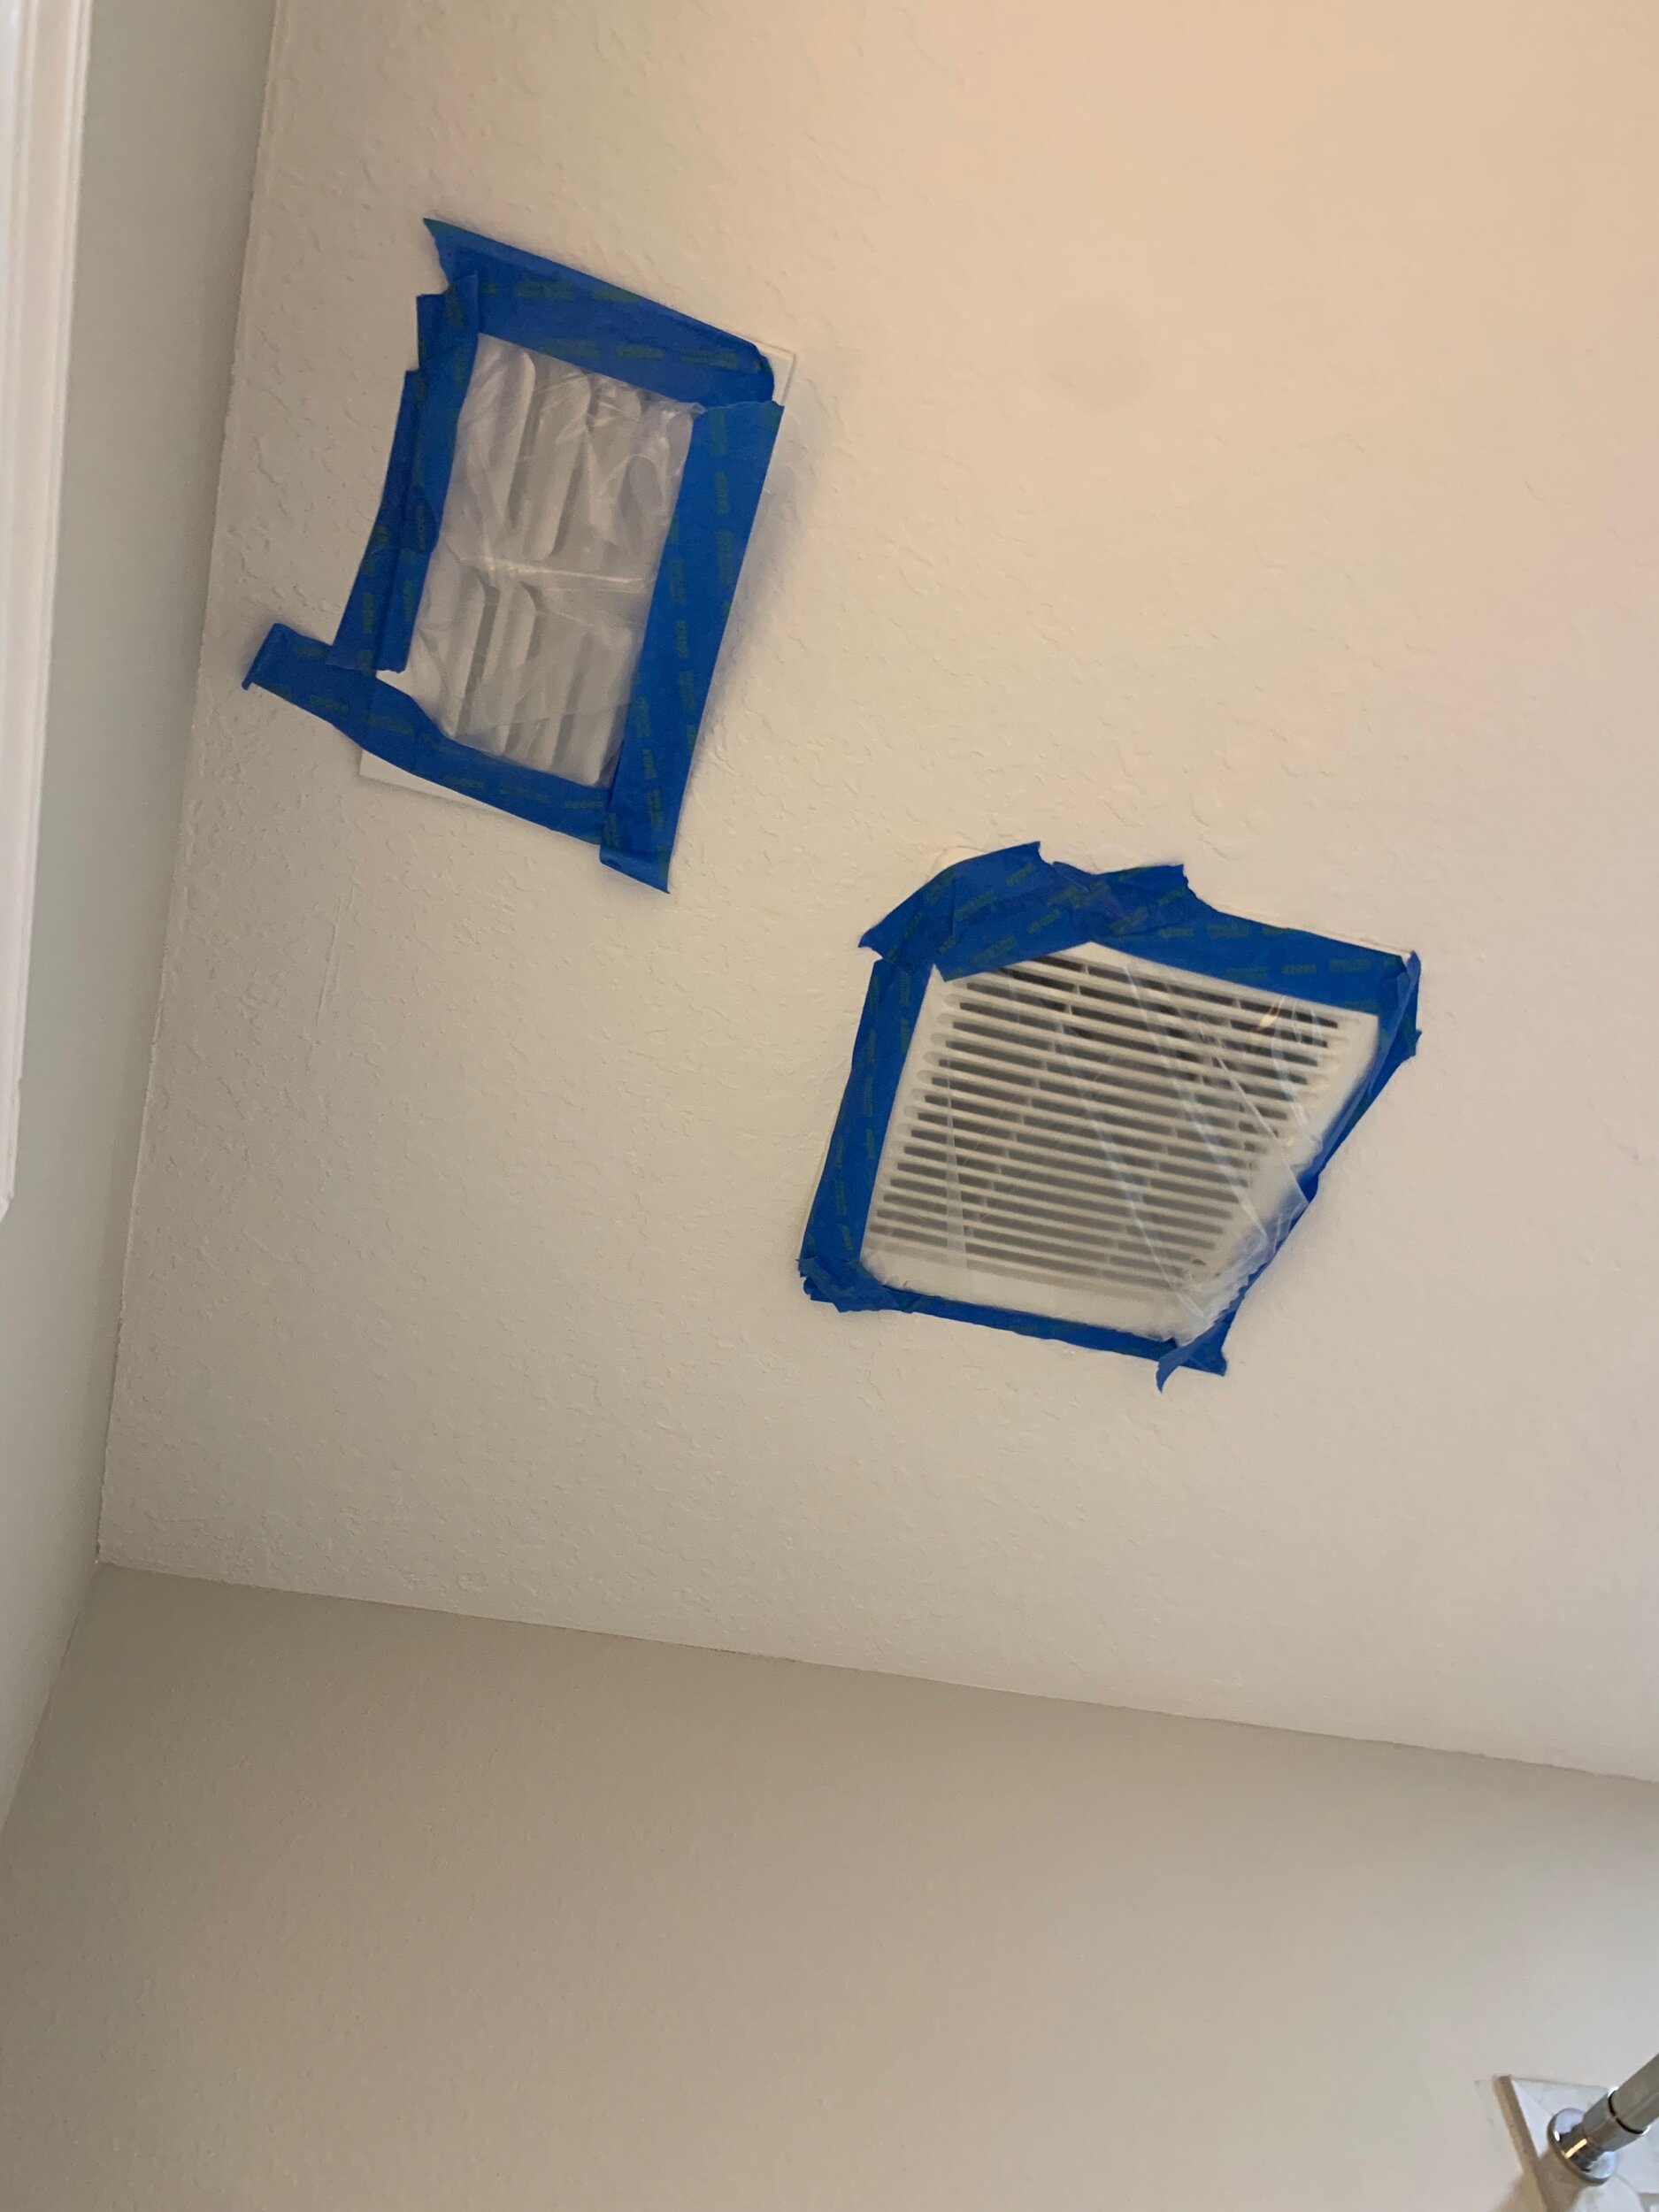 We also covered the AC vents so no dust gets into our air ducts.